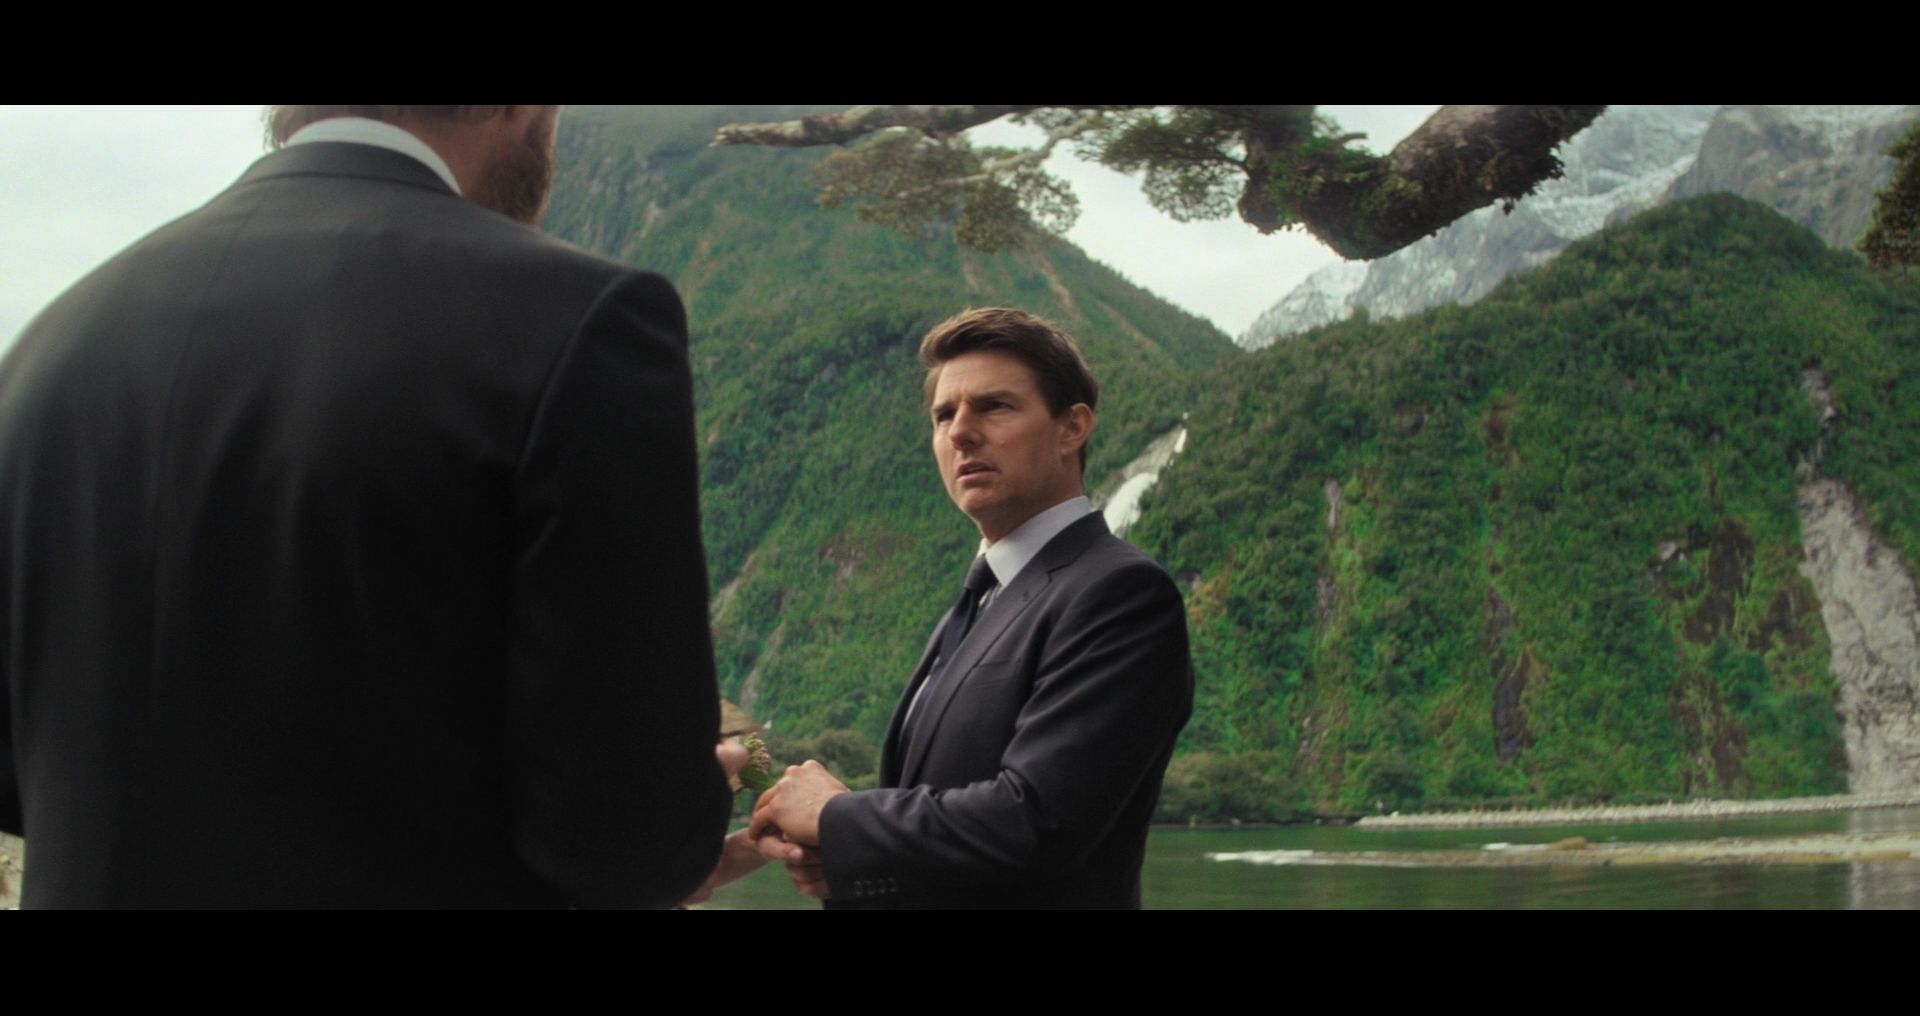 Mission-Impossible-Fallout-0049.jpg